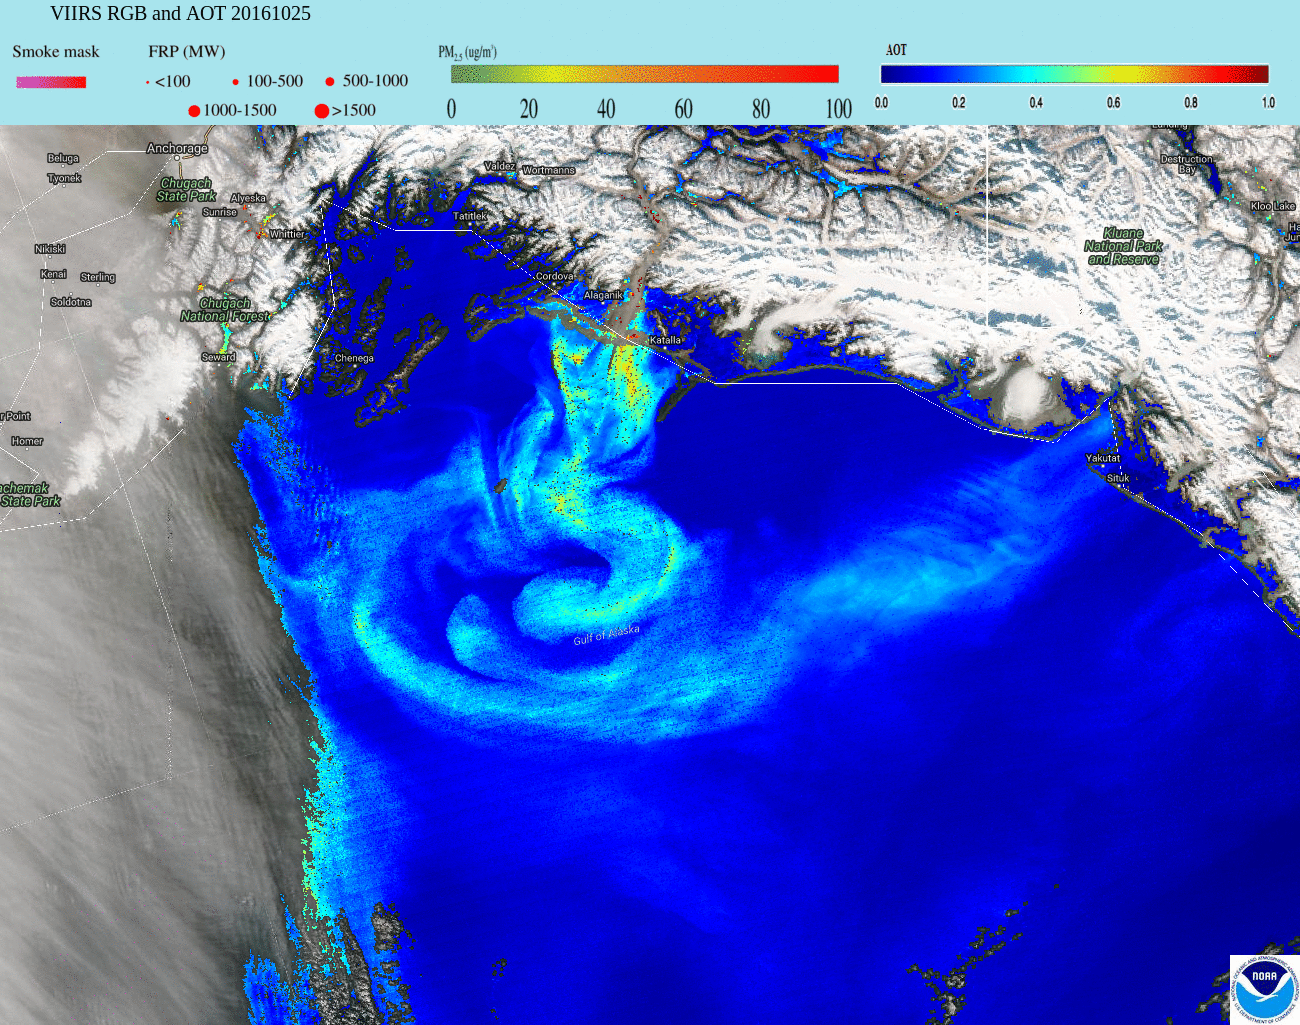 Suomi NPP VIIRS true-color RGB and Aerosol Optical Thickness images for 25 October [click to enlarge]